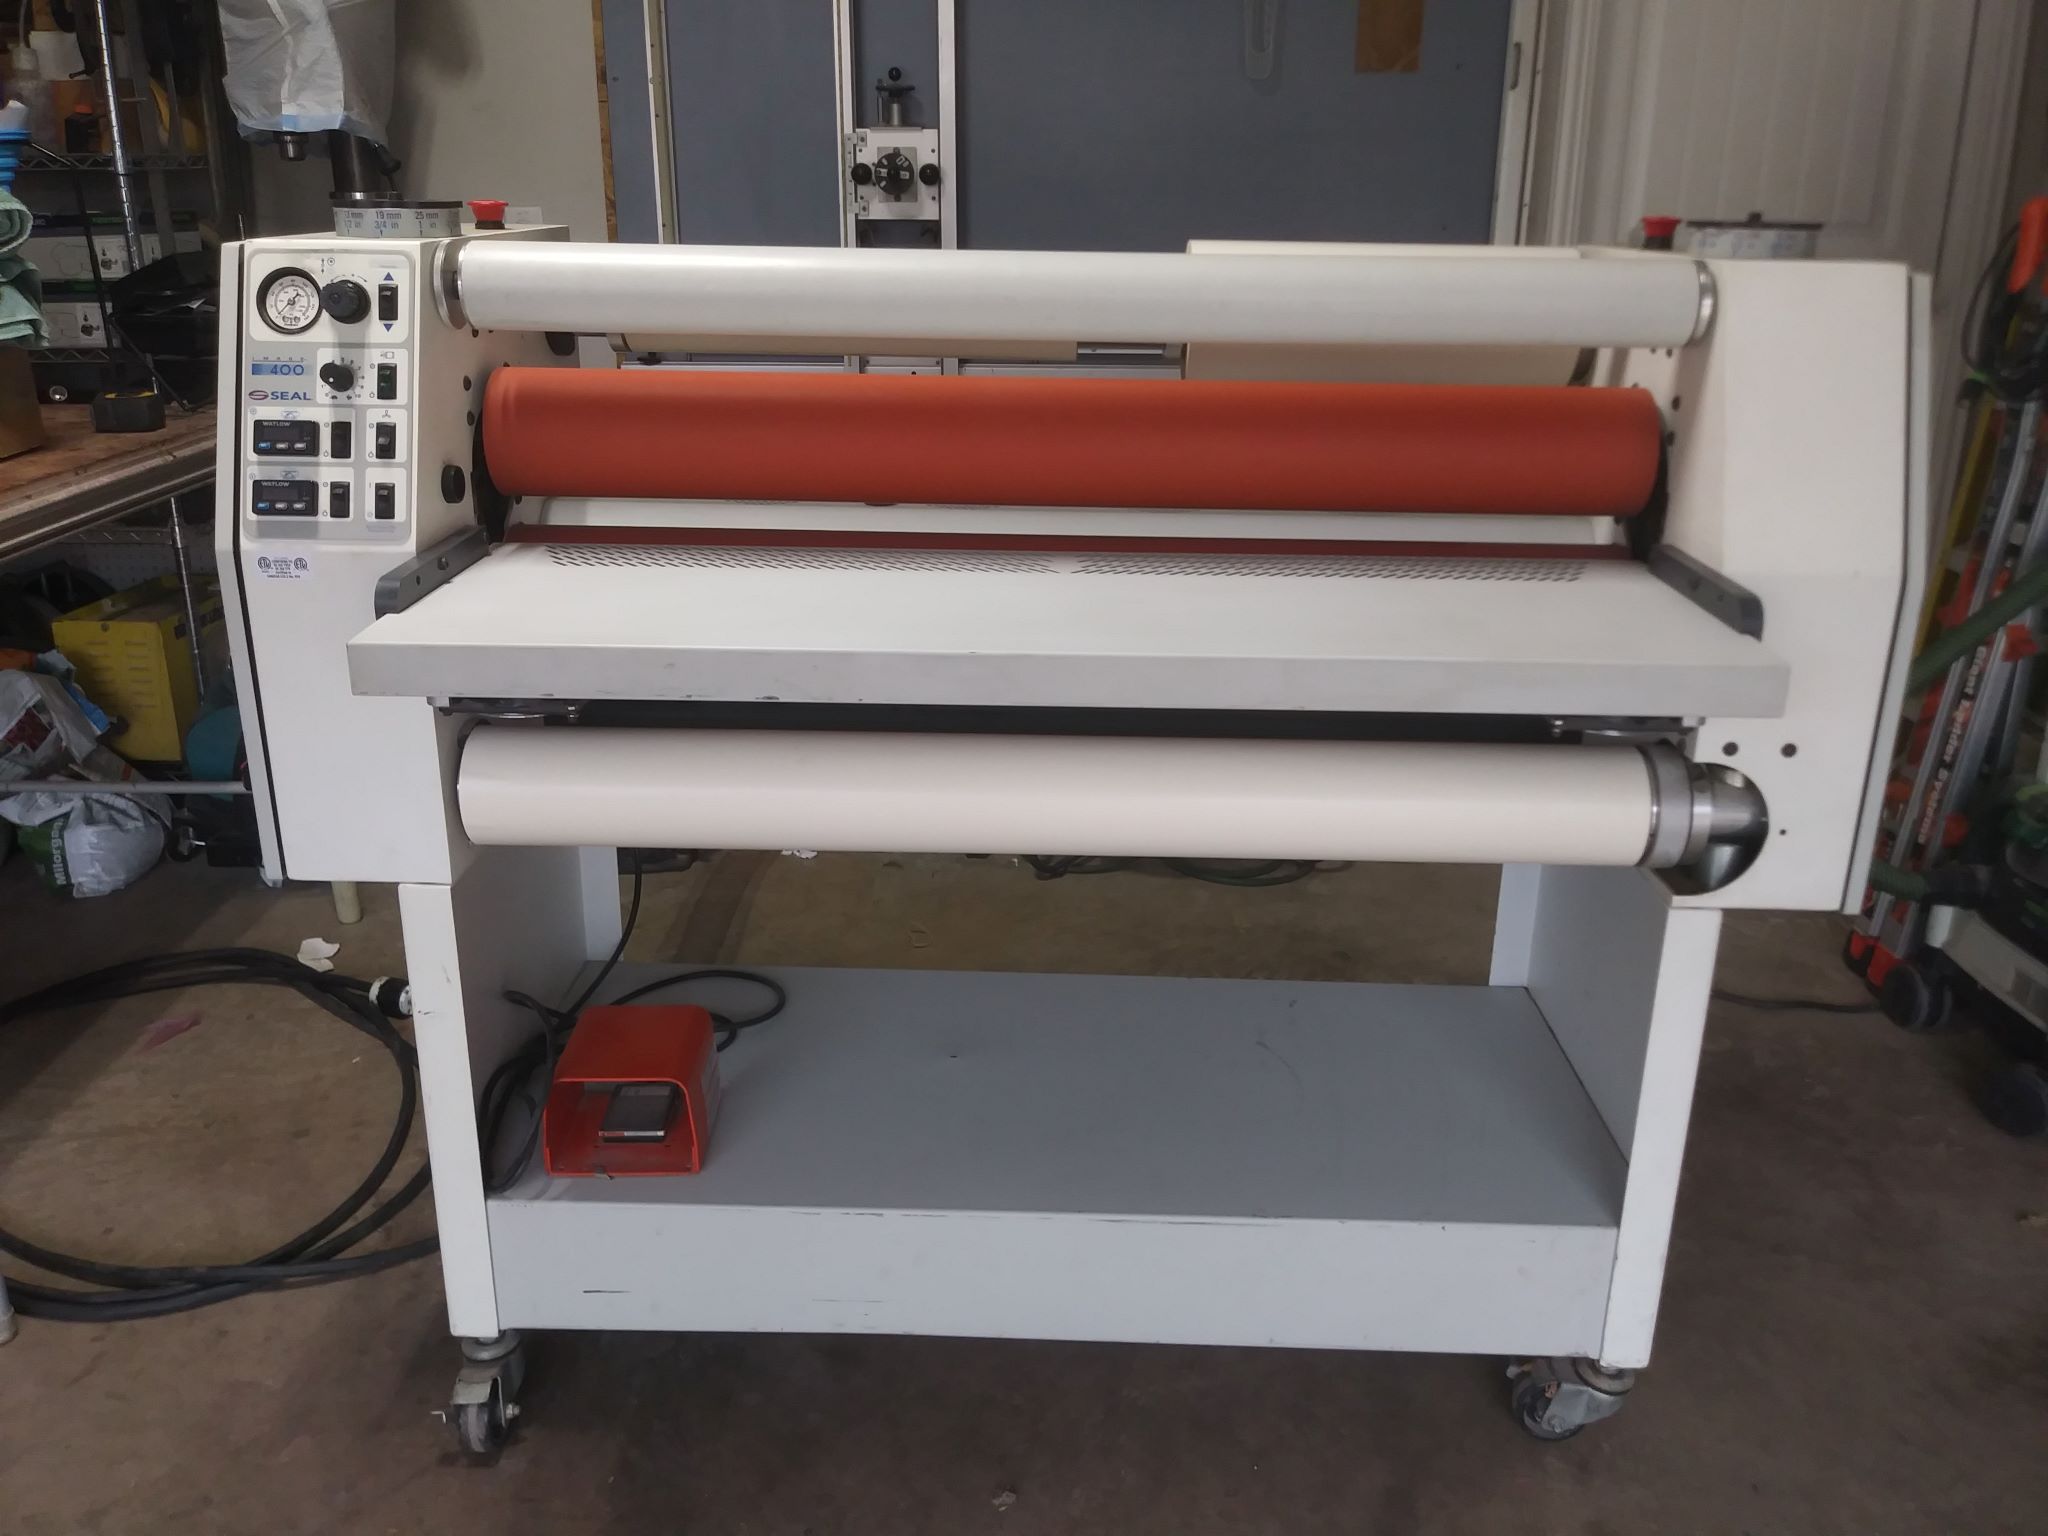 Equipment Lot: Esterly Speed-Mat 4060 Mat Cutter, Fletcher 3000 60″ Multi- Material Cutter, Seal Image 400 Dual Heated Roller Laminator, Gapp 60 inch Canvas Stretch Master, ITW AMP Mitre-Mite VN 2 +1 V (Fletcher U300/U-300) Vnailer, Hitachi 12 inch Sliding Compound Miter Saw, Knapp 5-in-1 Combo Woodworking Machine 410 Profit, Grizzly Dust Collector 4 inch, Canon imagePROGRF iPF8400 (Used) Item # UE-091123A